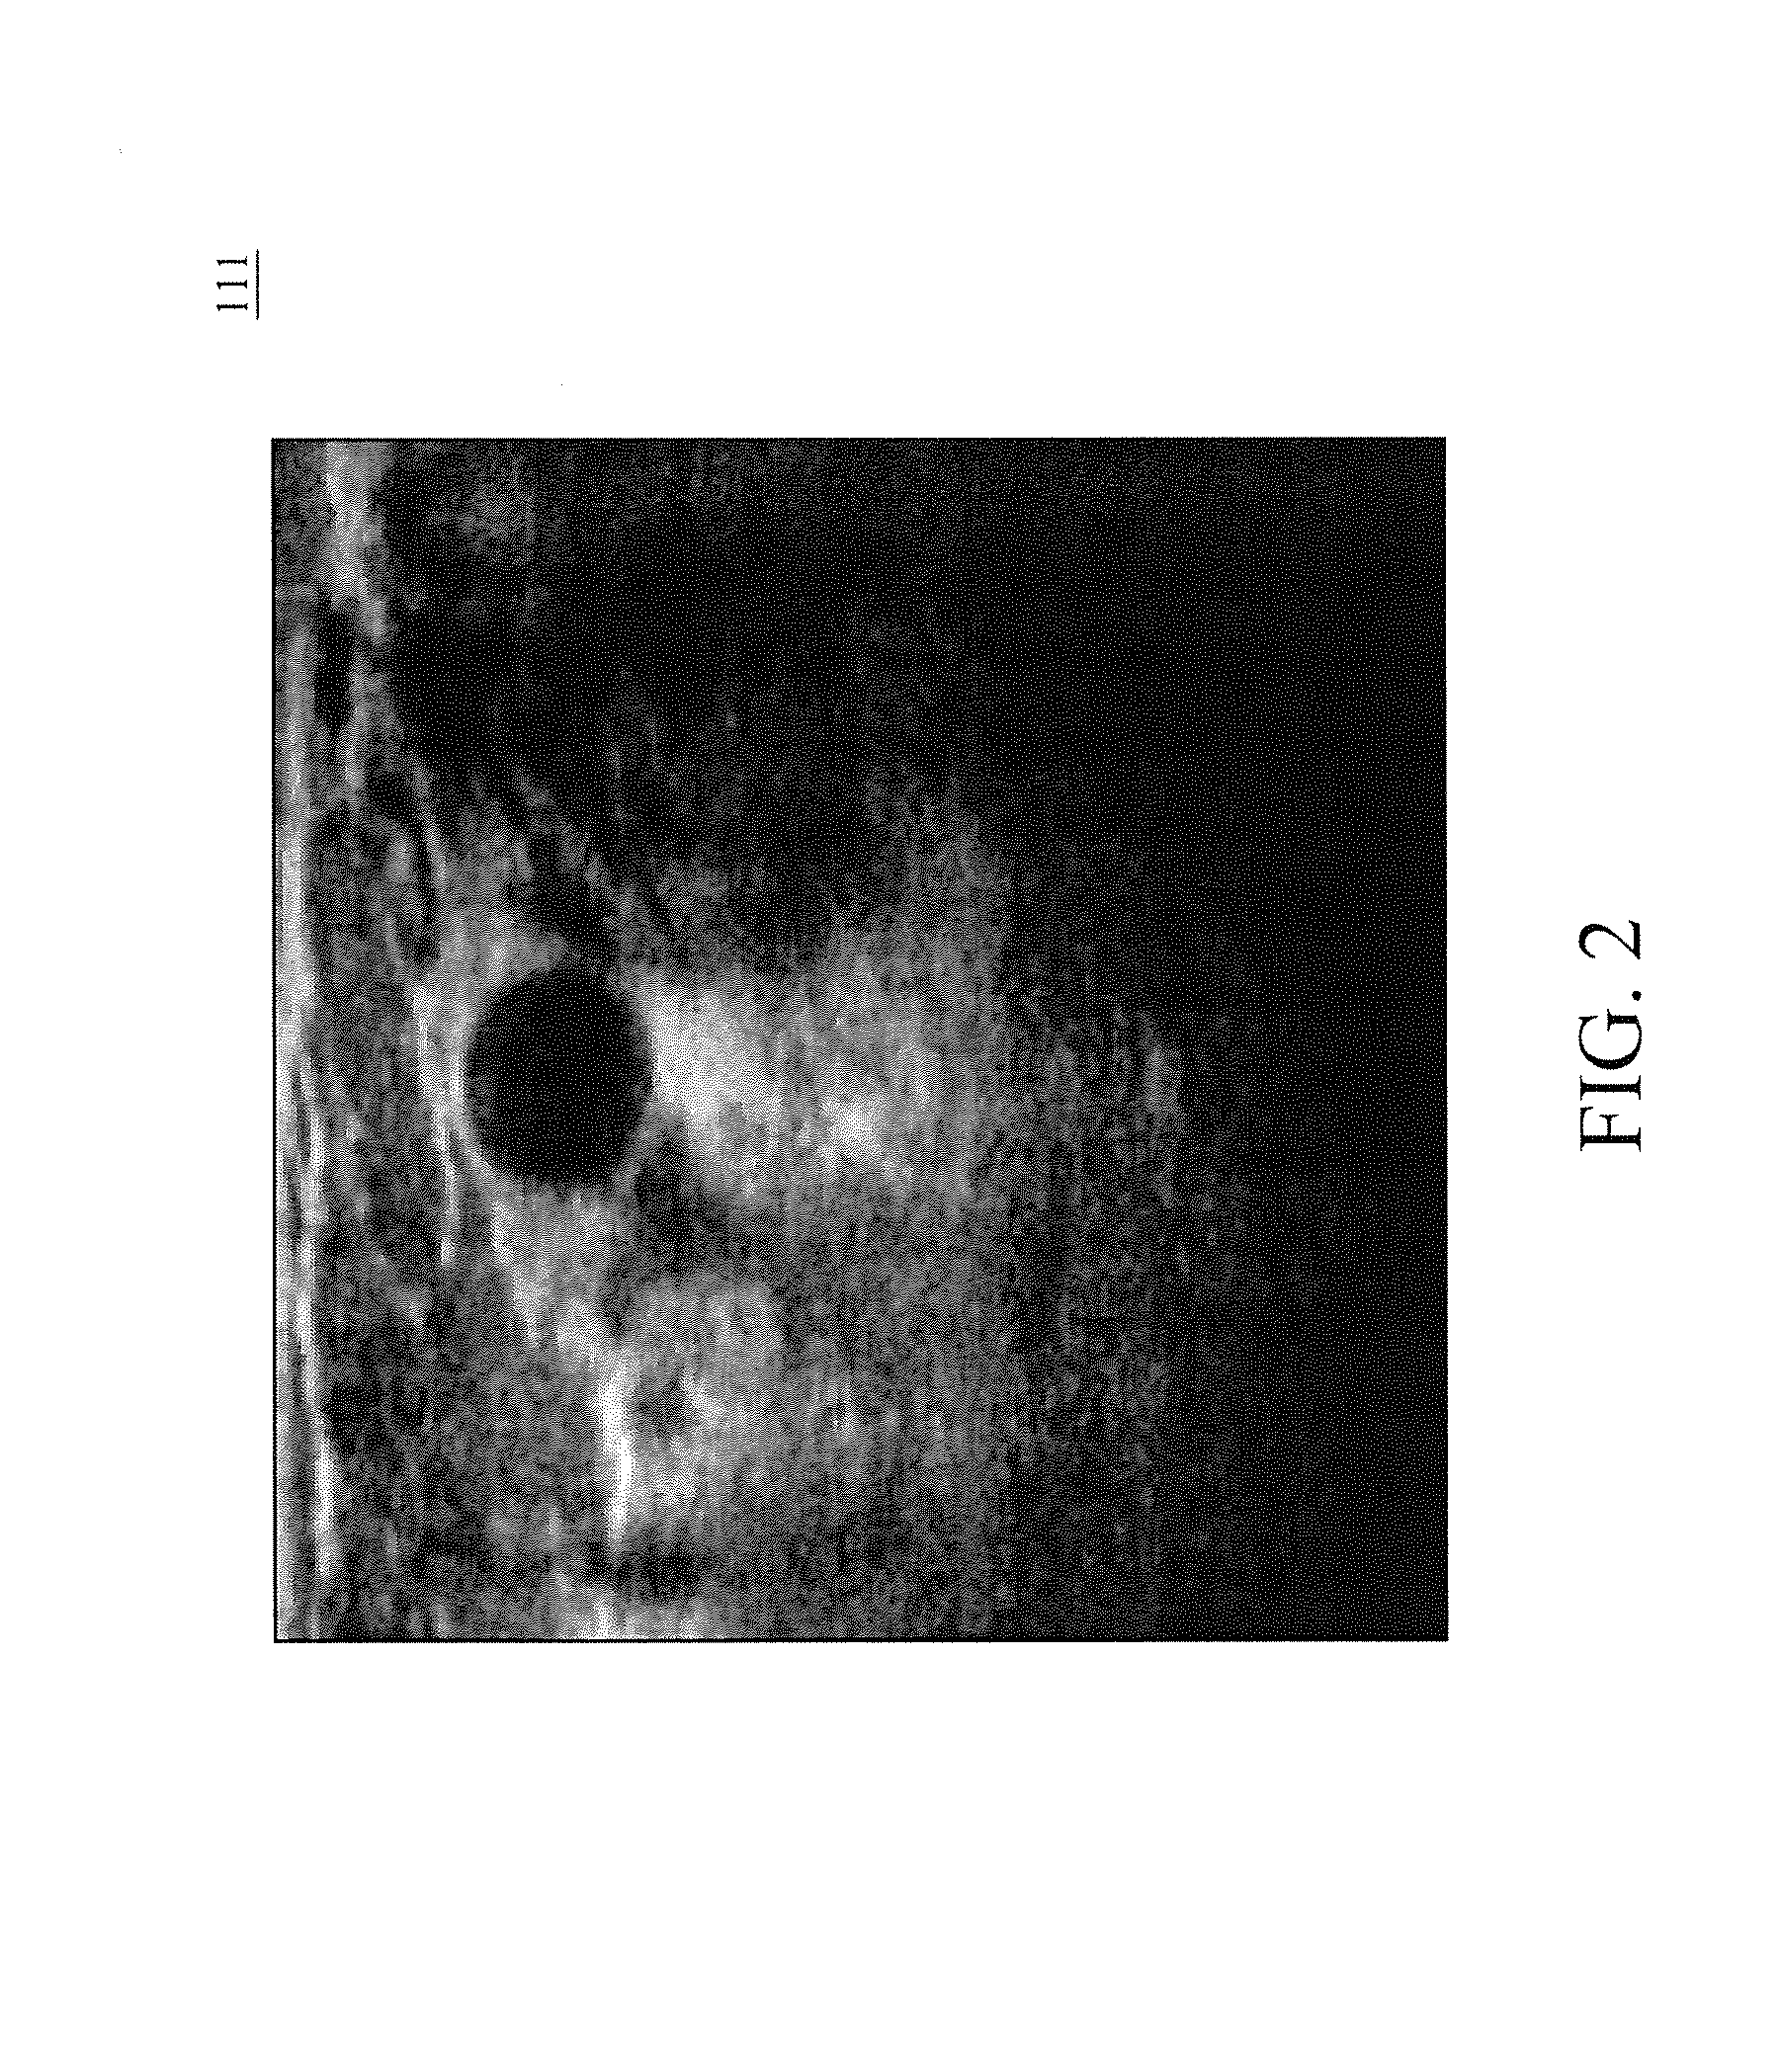 Ultrasound imaging breast tumor detection and diagnostic system and method